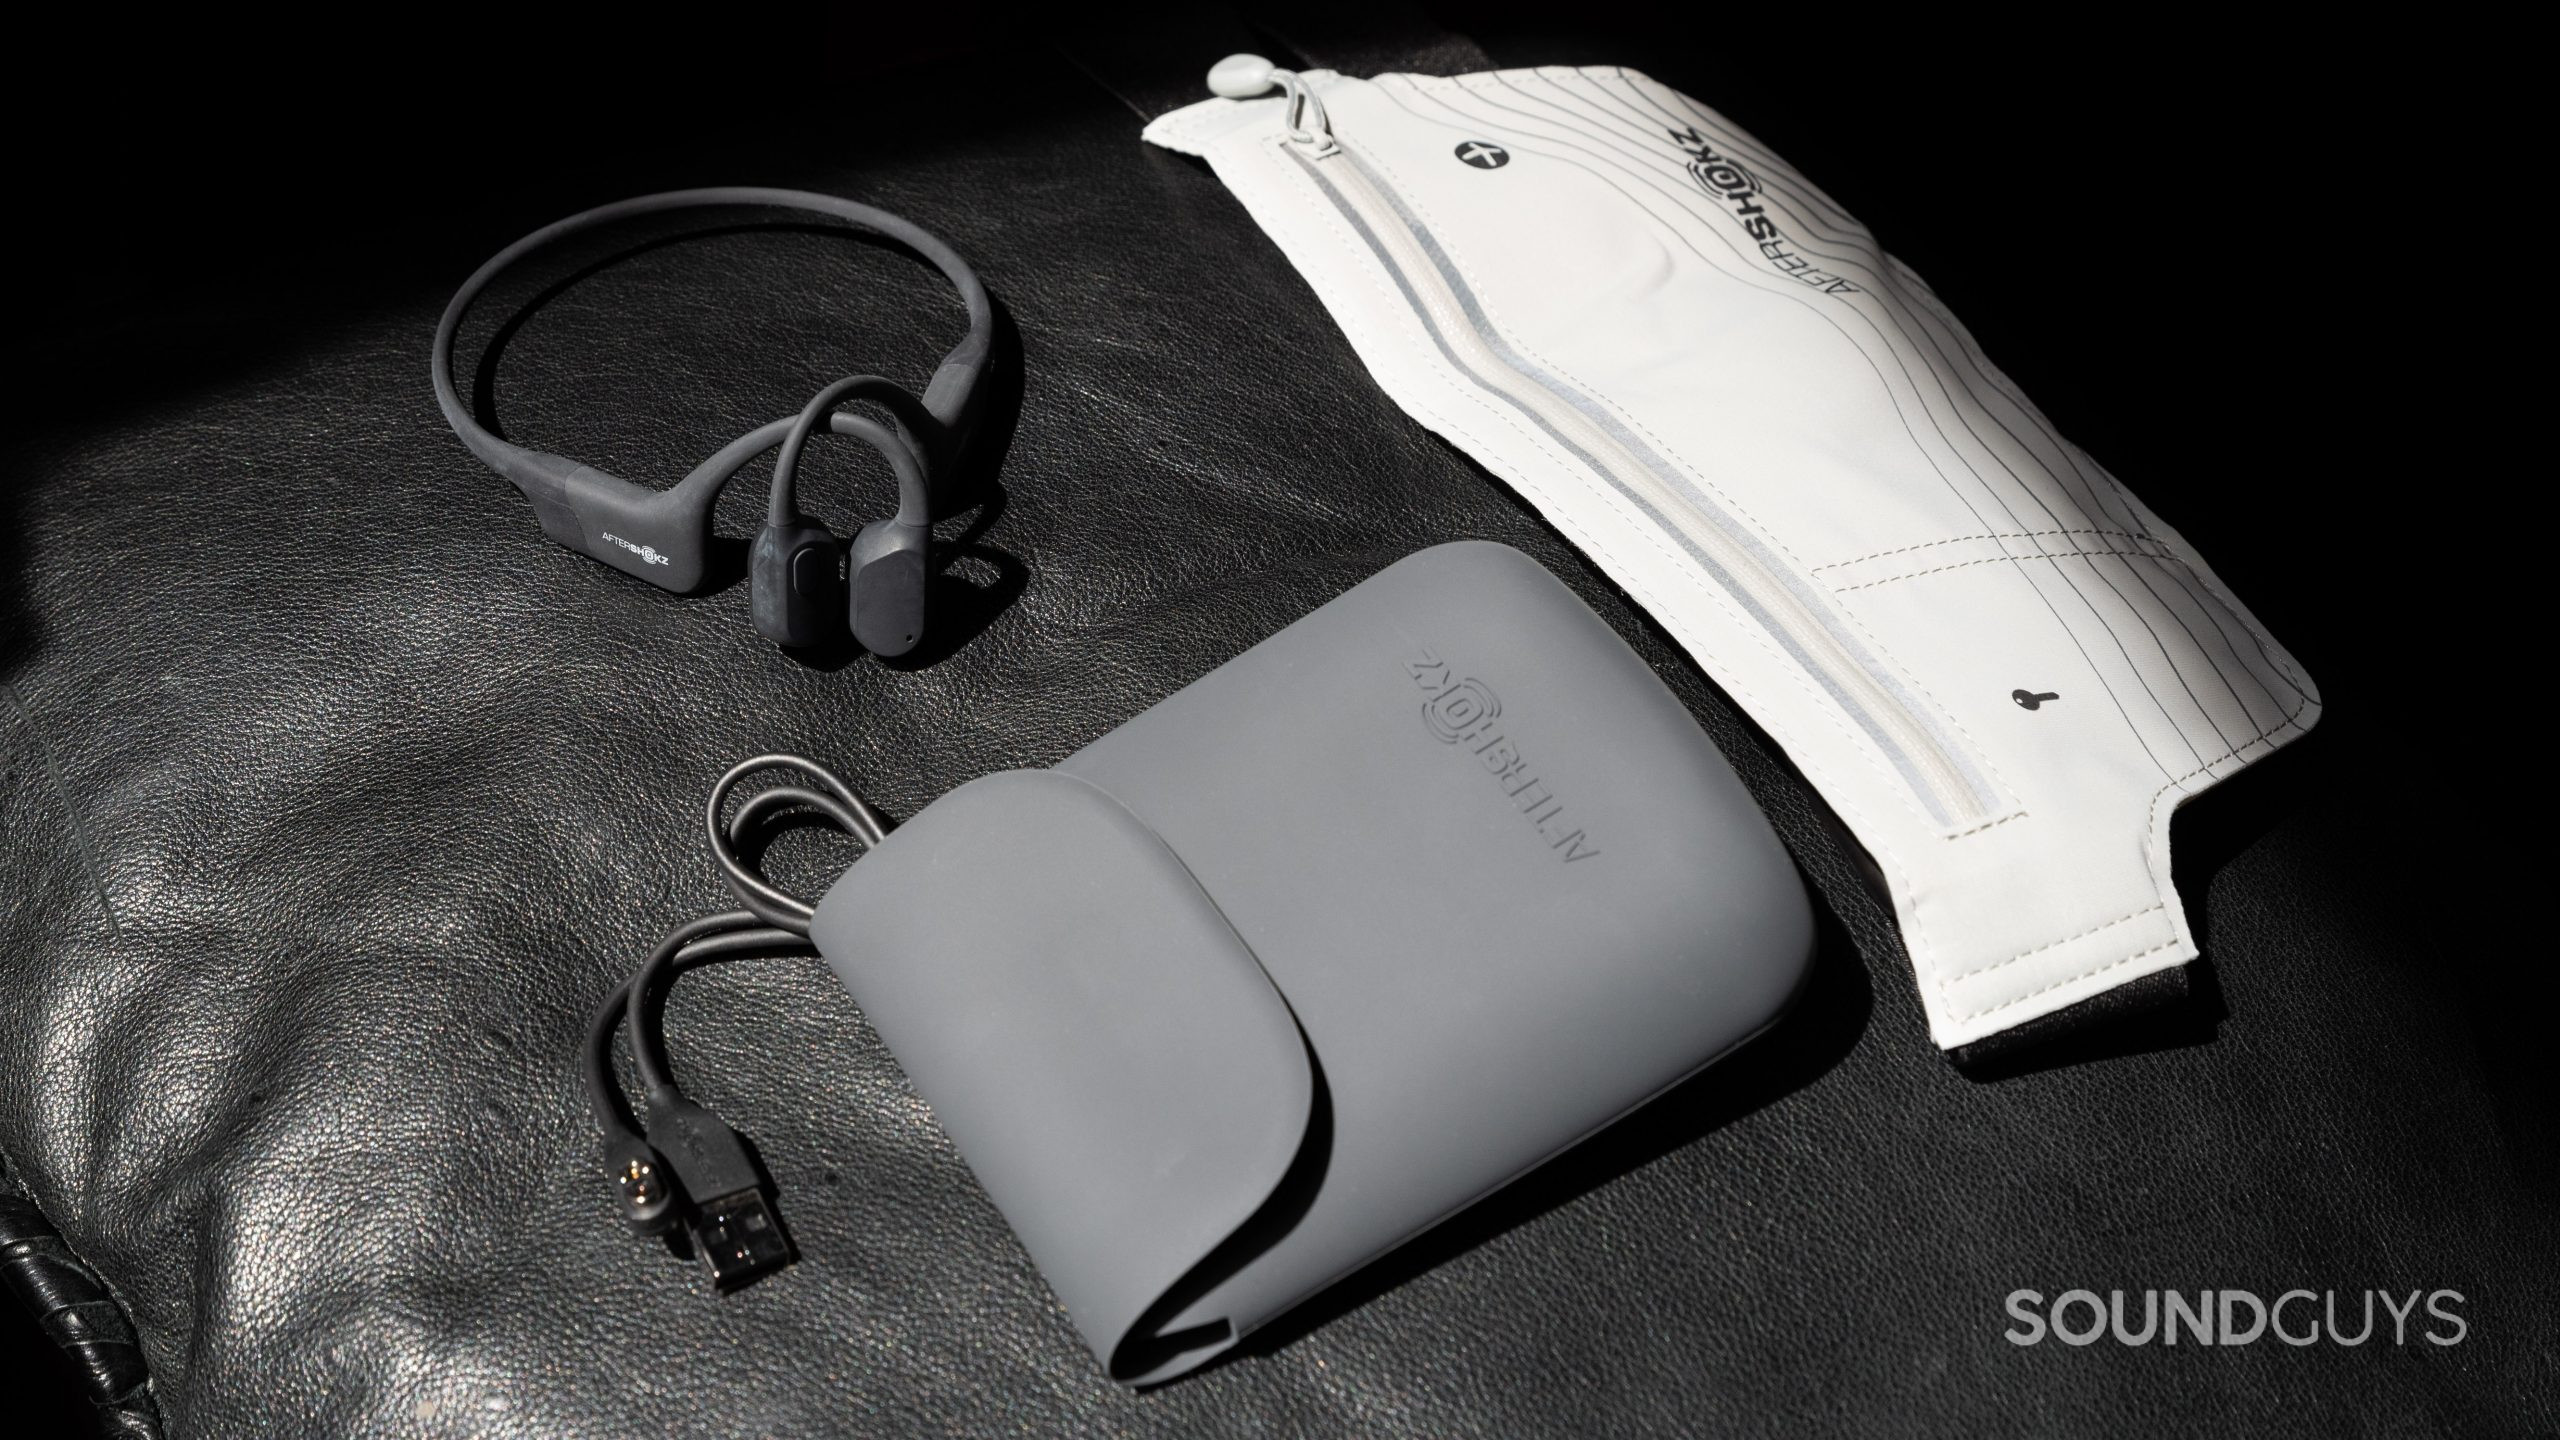 The Aftershokz Aeropex bone conduction headphones accessories lay on a black surface.